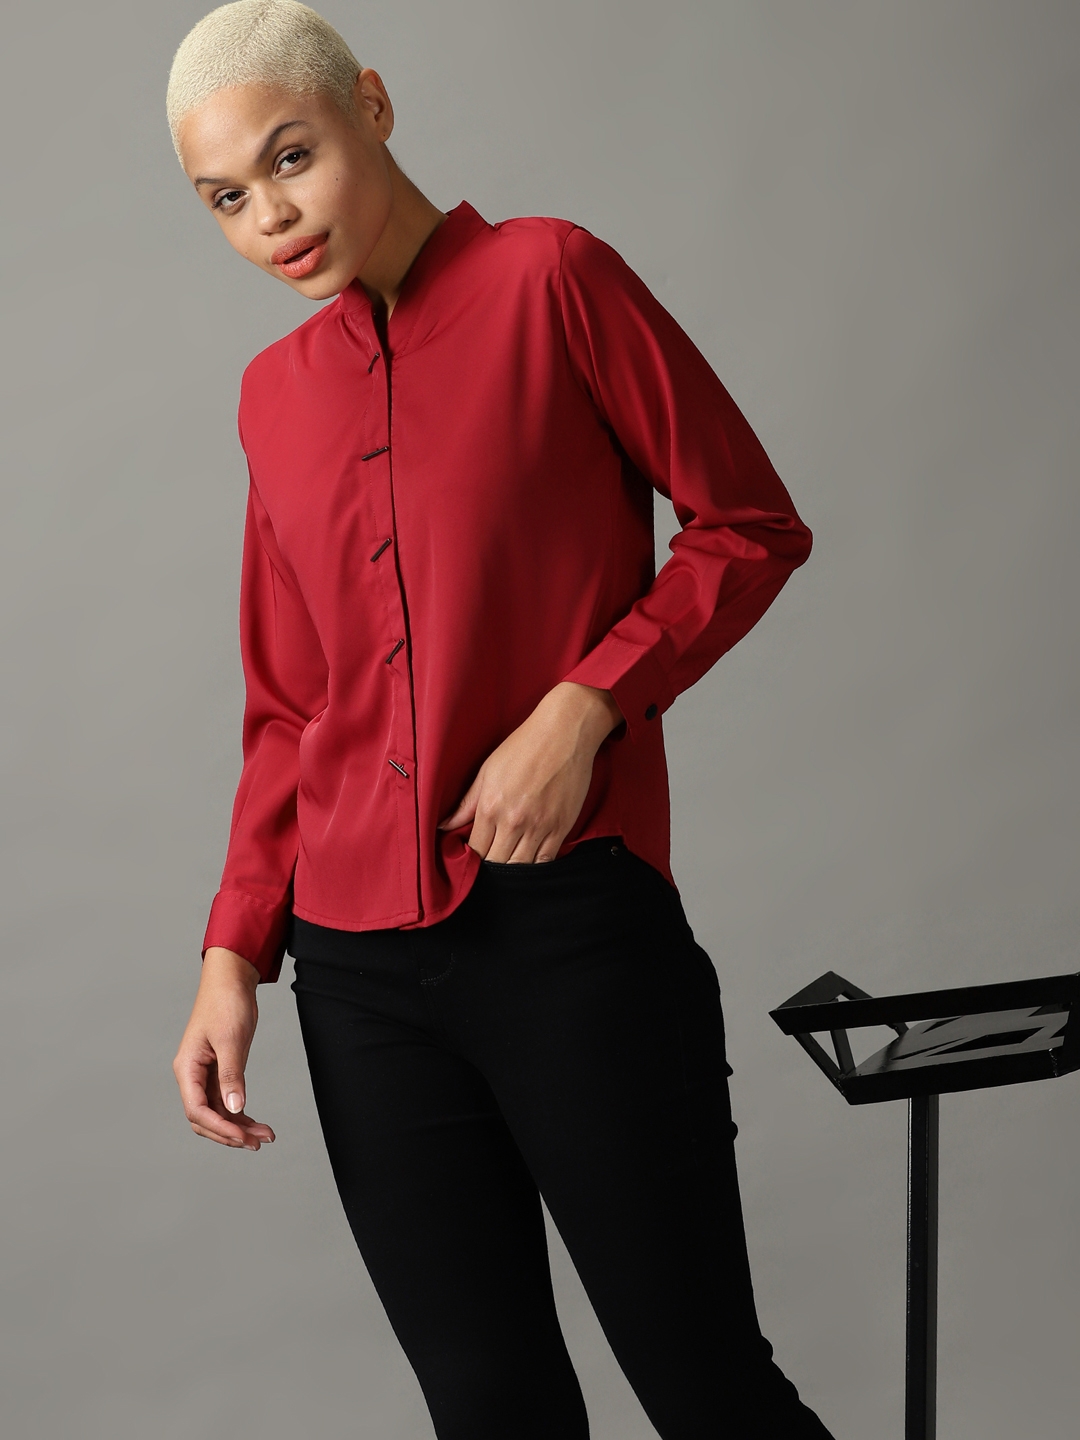 Women's Red Polyester Solid Casual Shirts